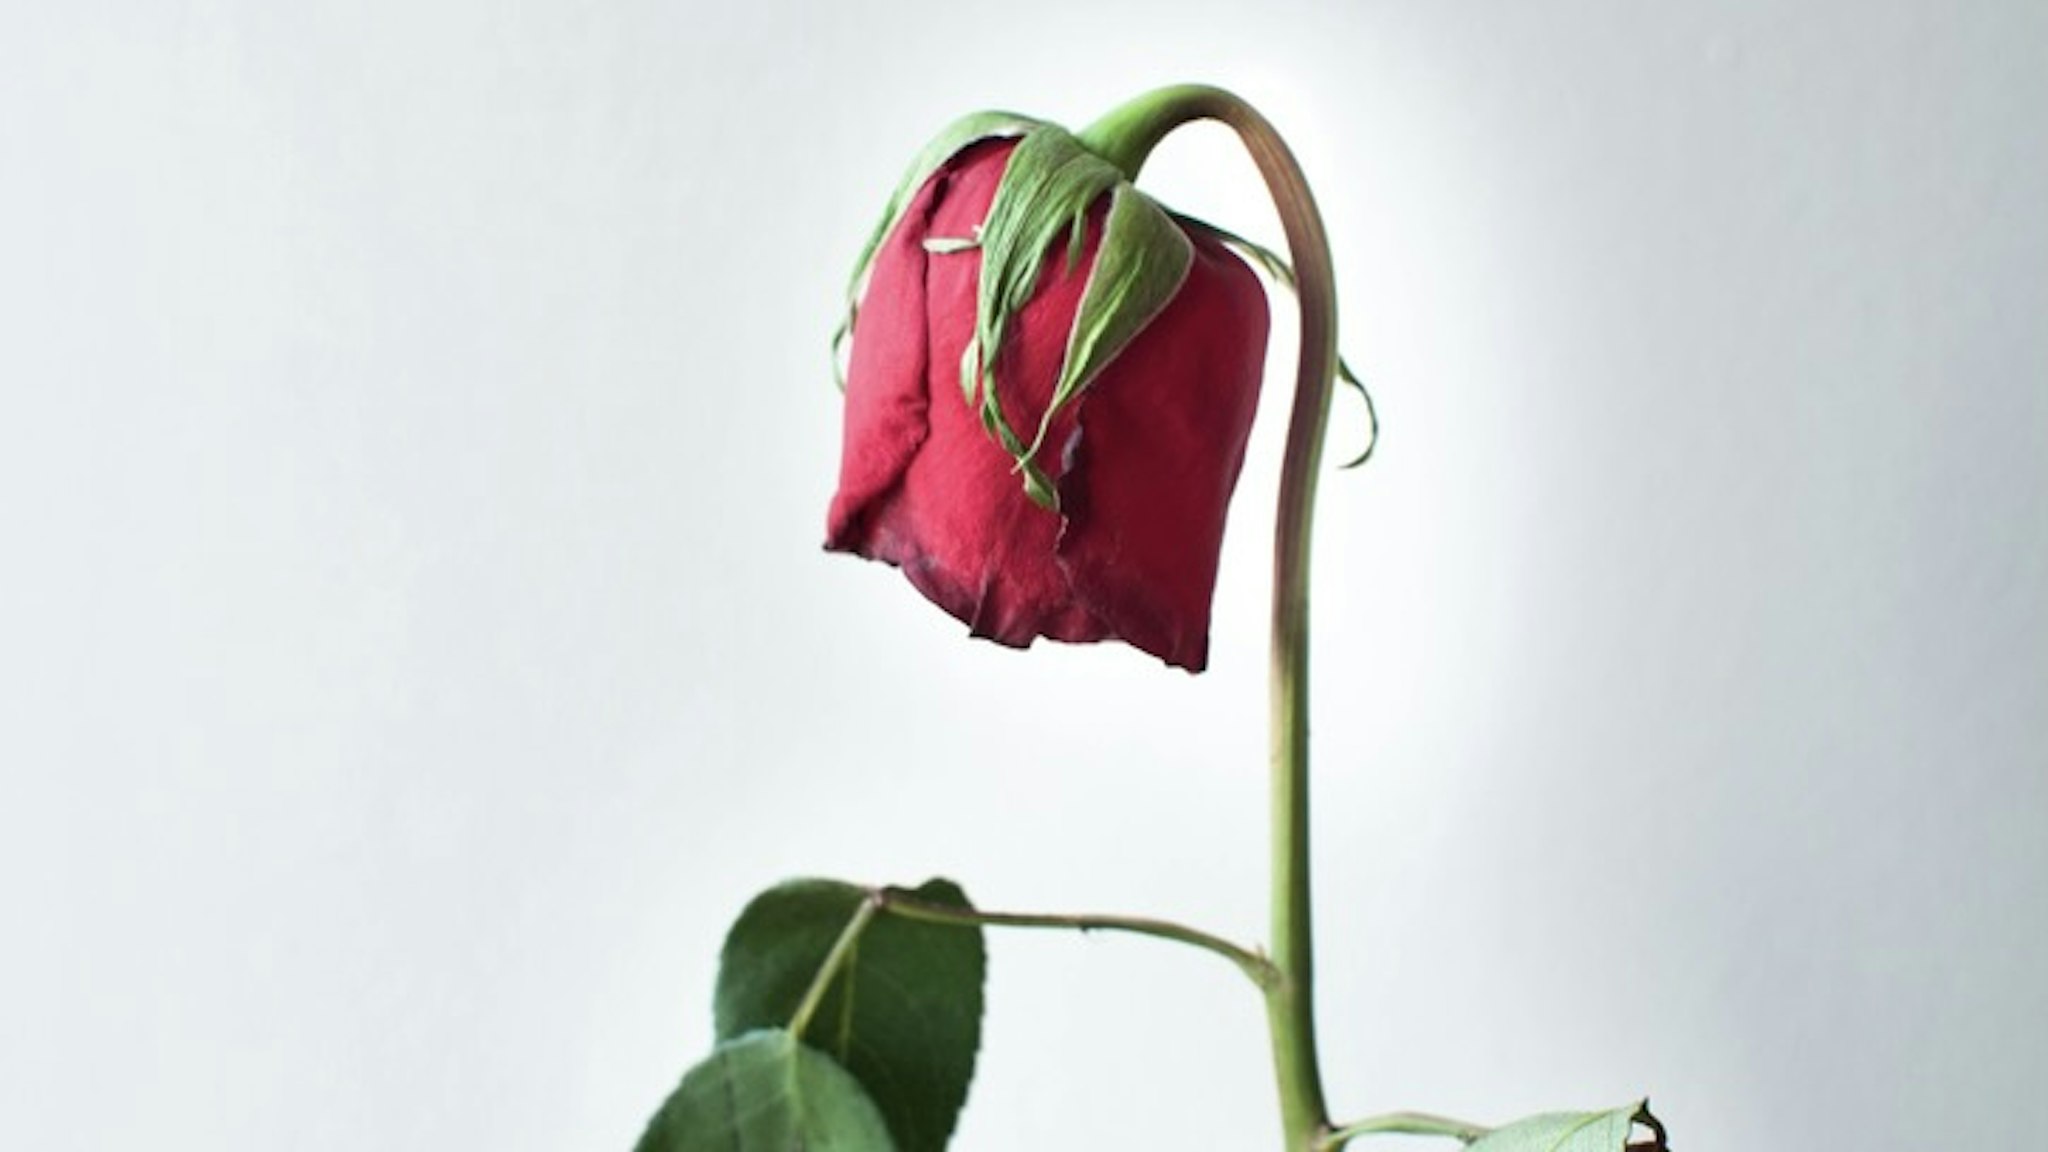 Holding a dried rose flower - stock photo Holding a dried rose flower against white background